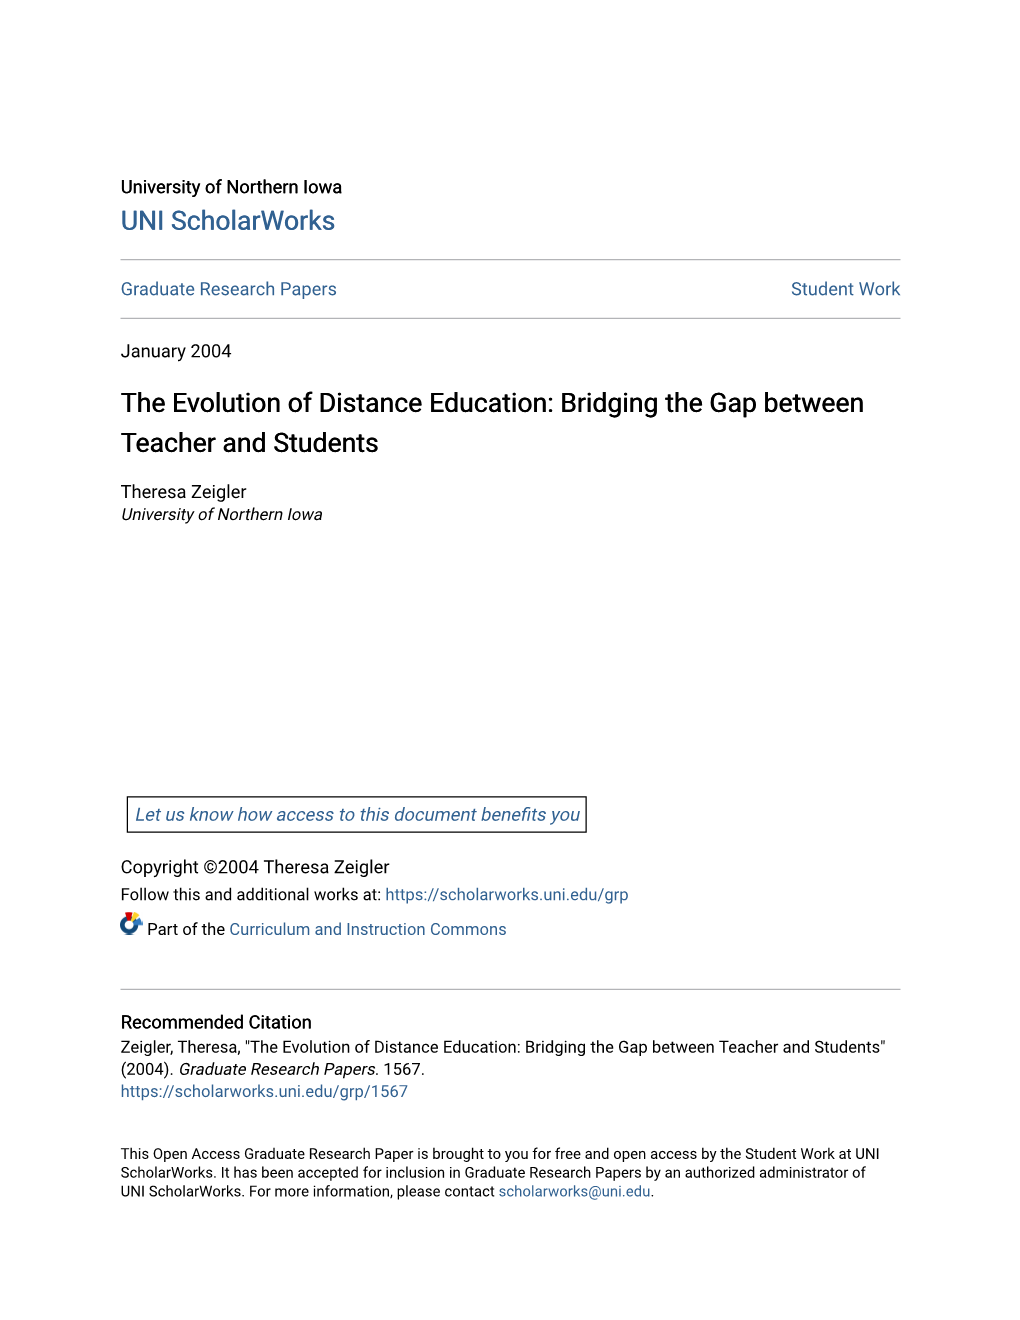 The Evolution of Distance Education: Bridging the Gap Between Teacher and Students